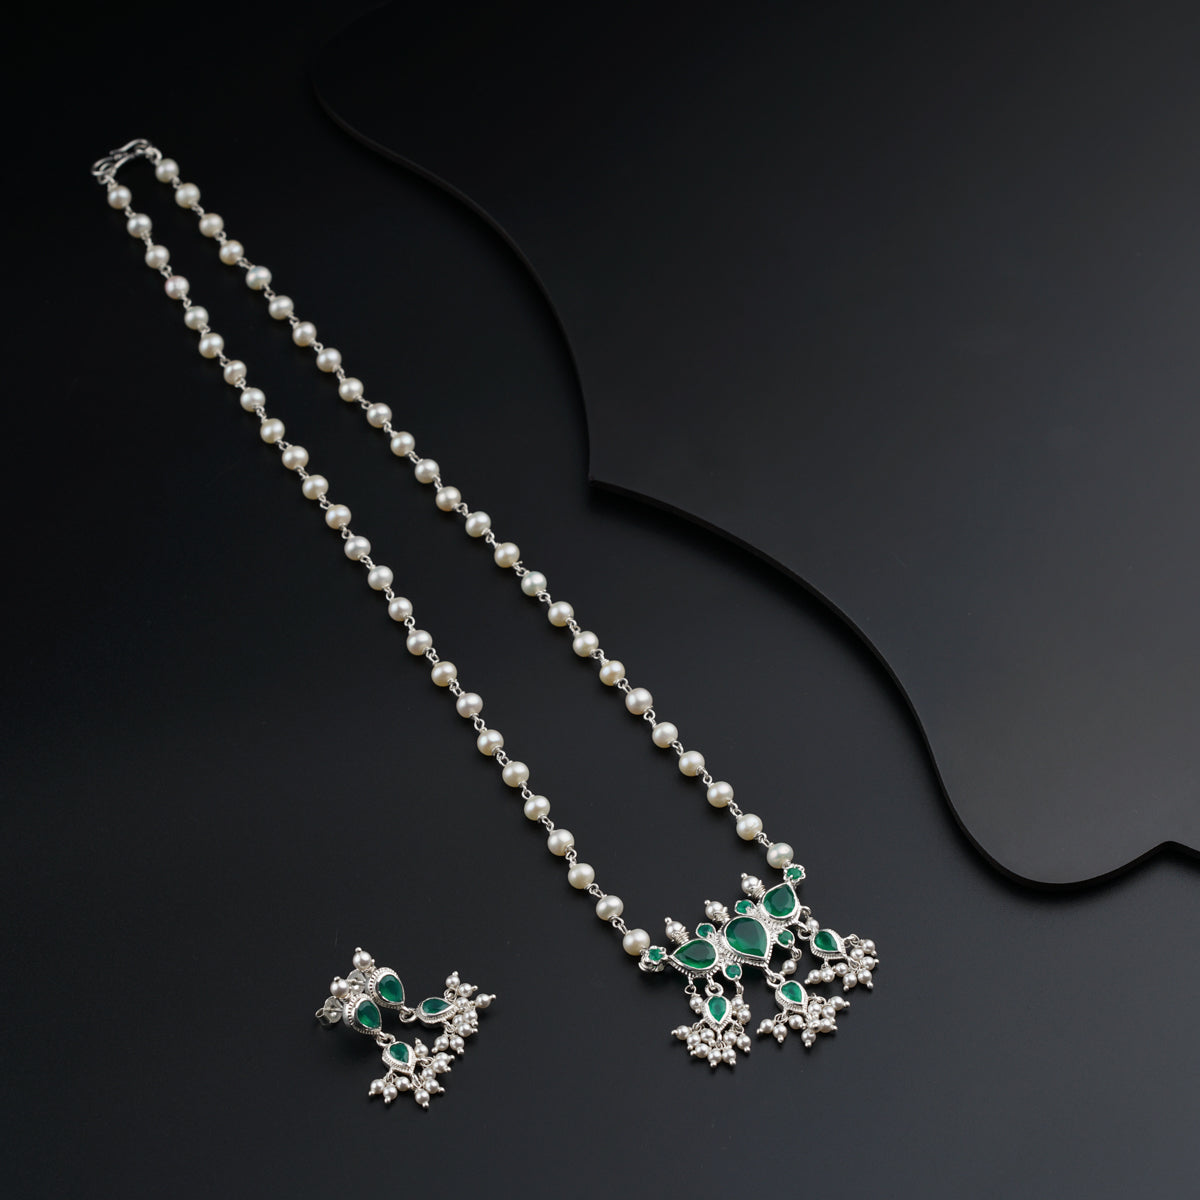 a pair of pearls and emerald necklaces on a black surface